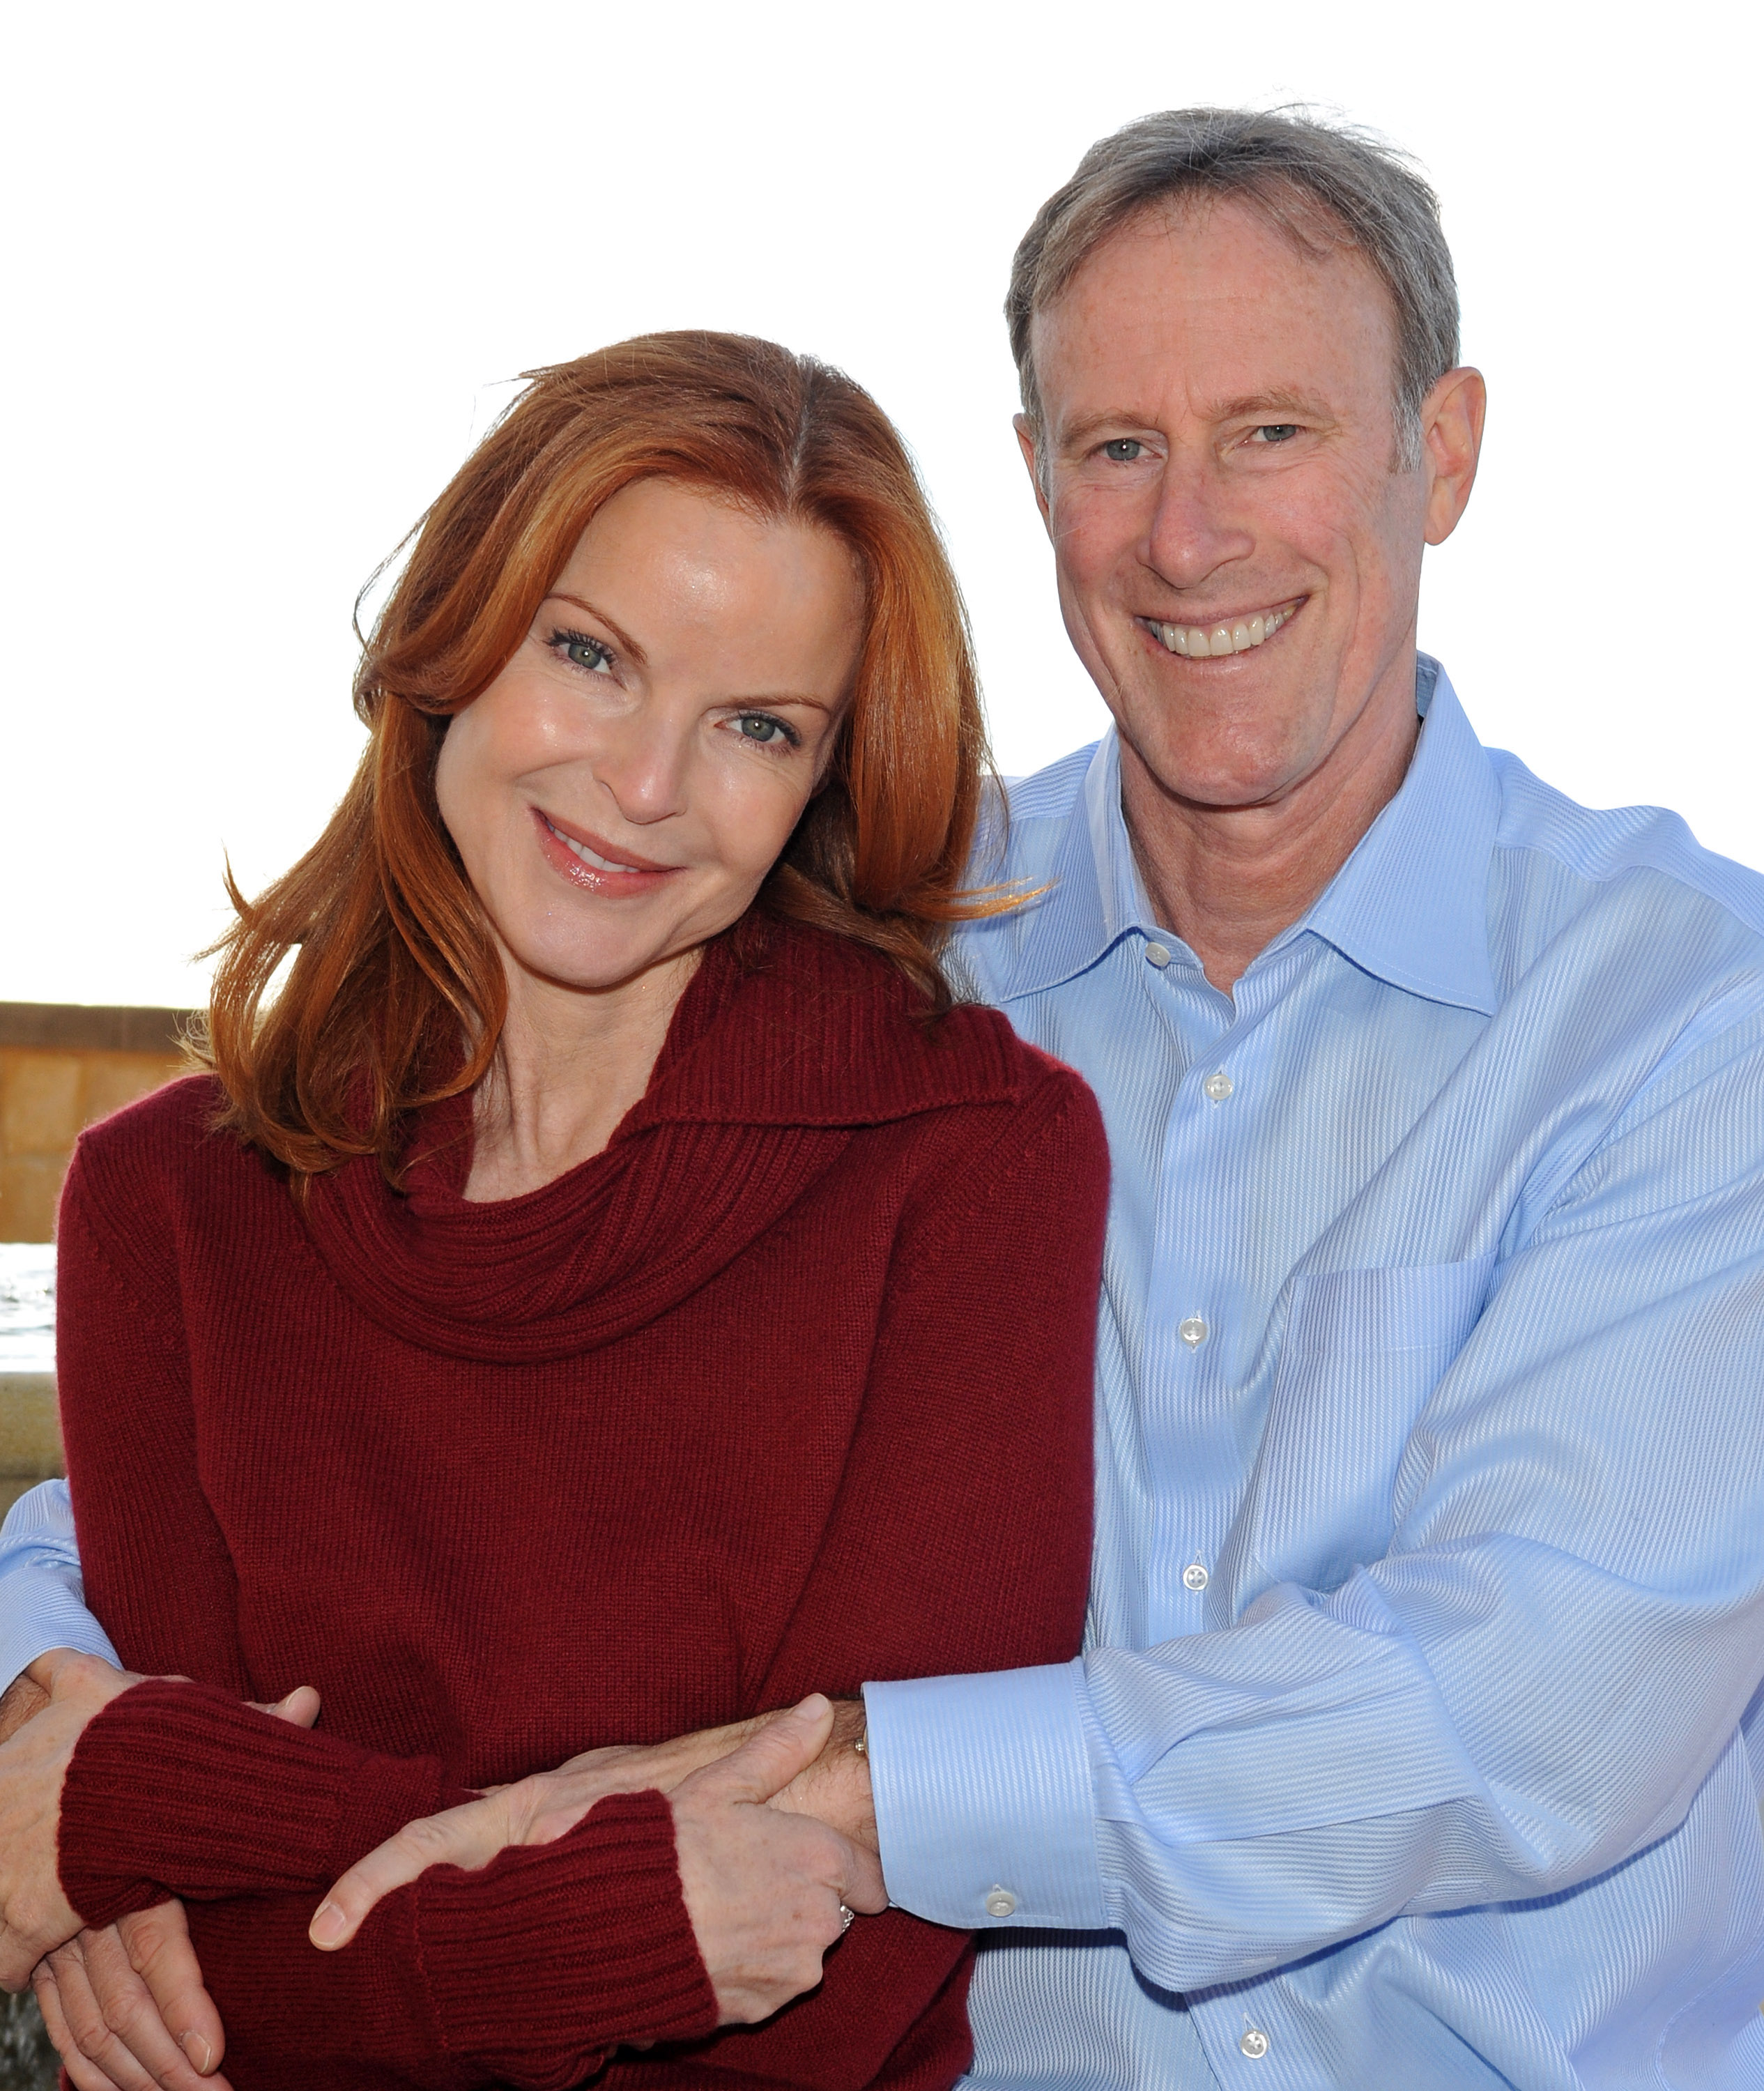 Marcia Cross and Tom Mahoney at Pelican Hill Resort on December 31, 2010, in Newport Beach, California. | Source: Getty Images